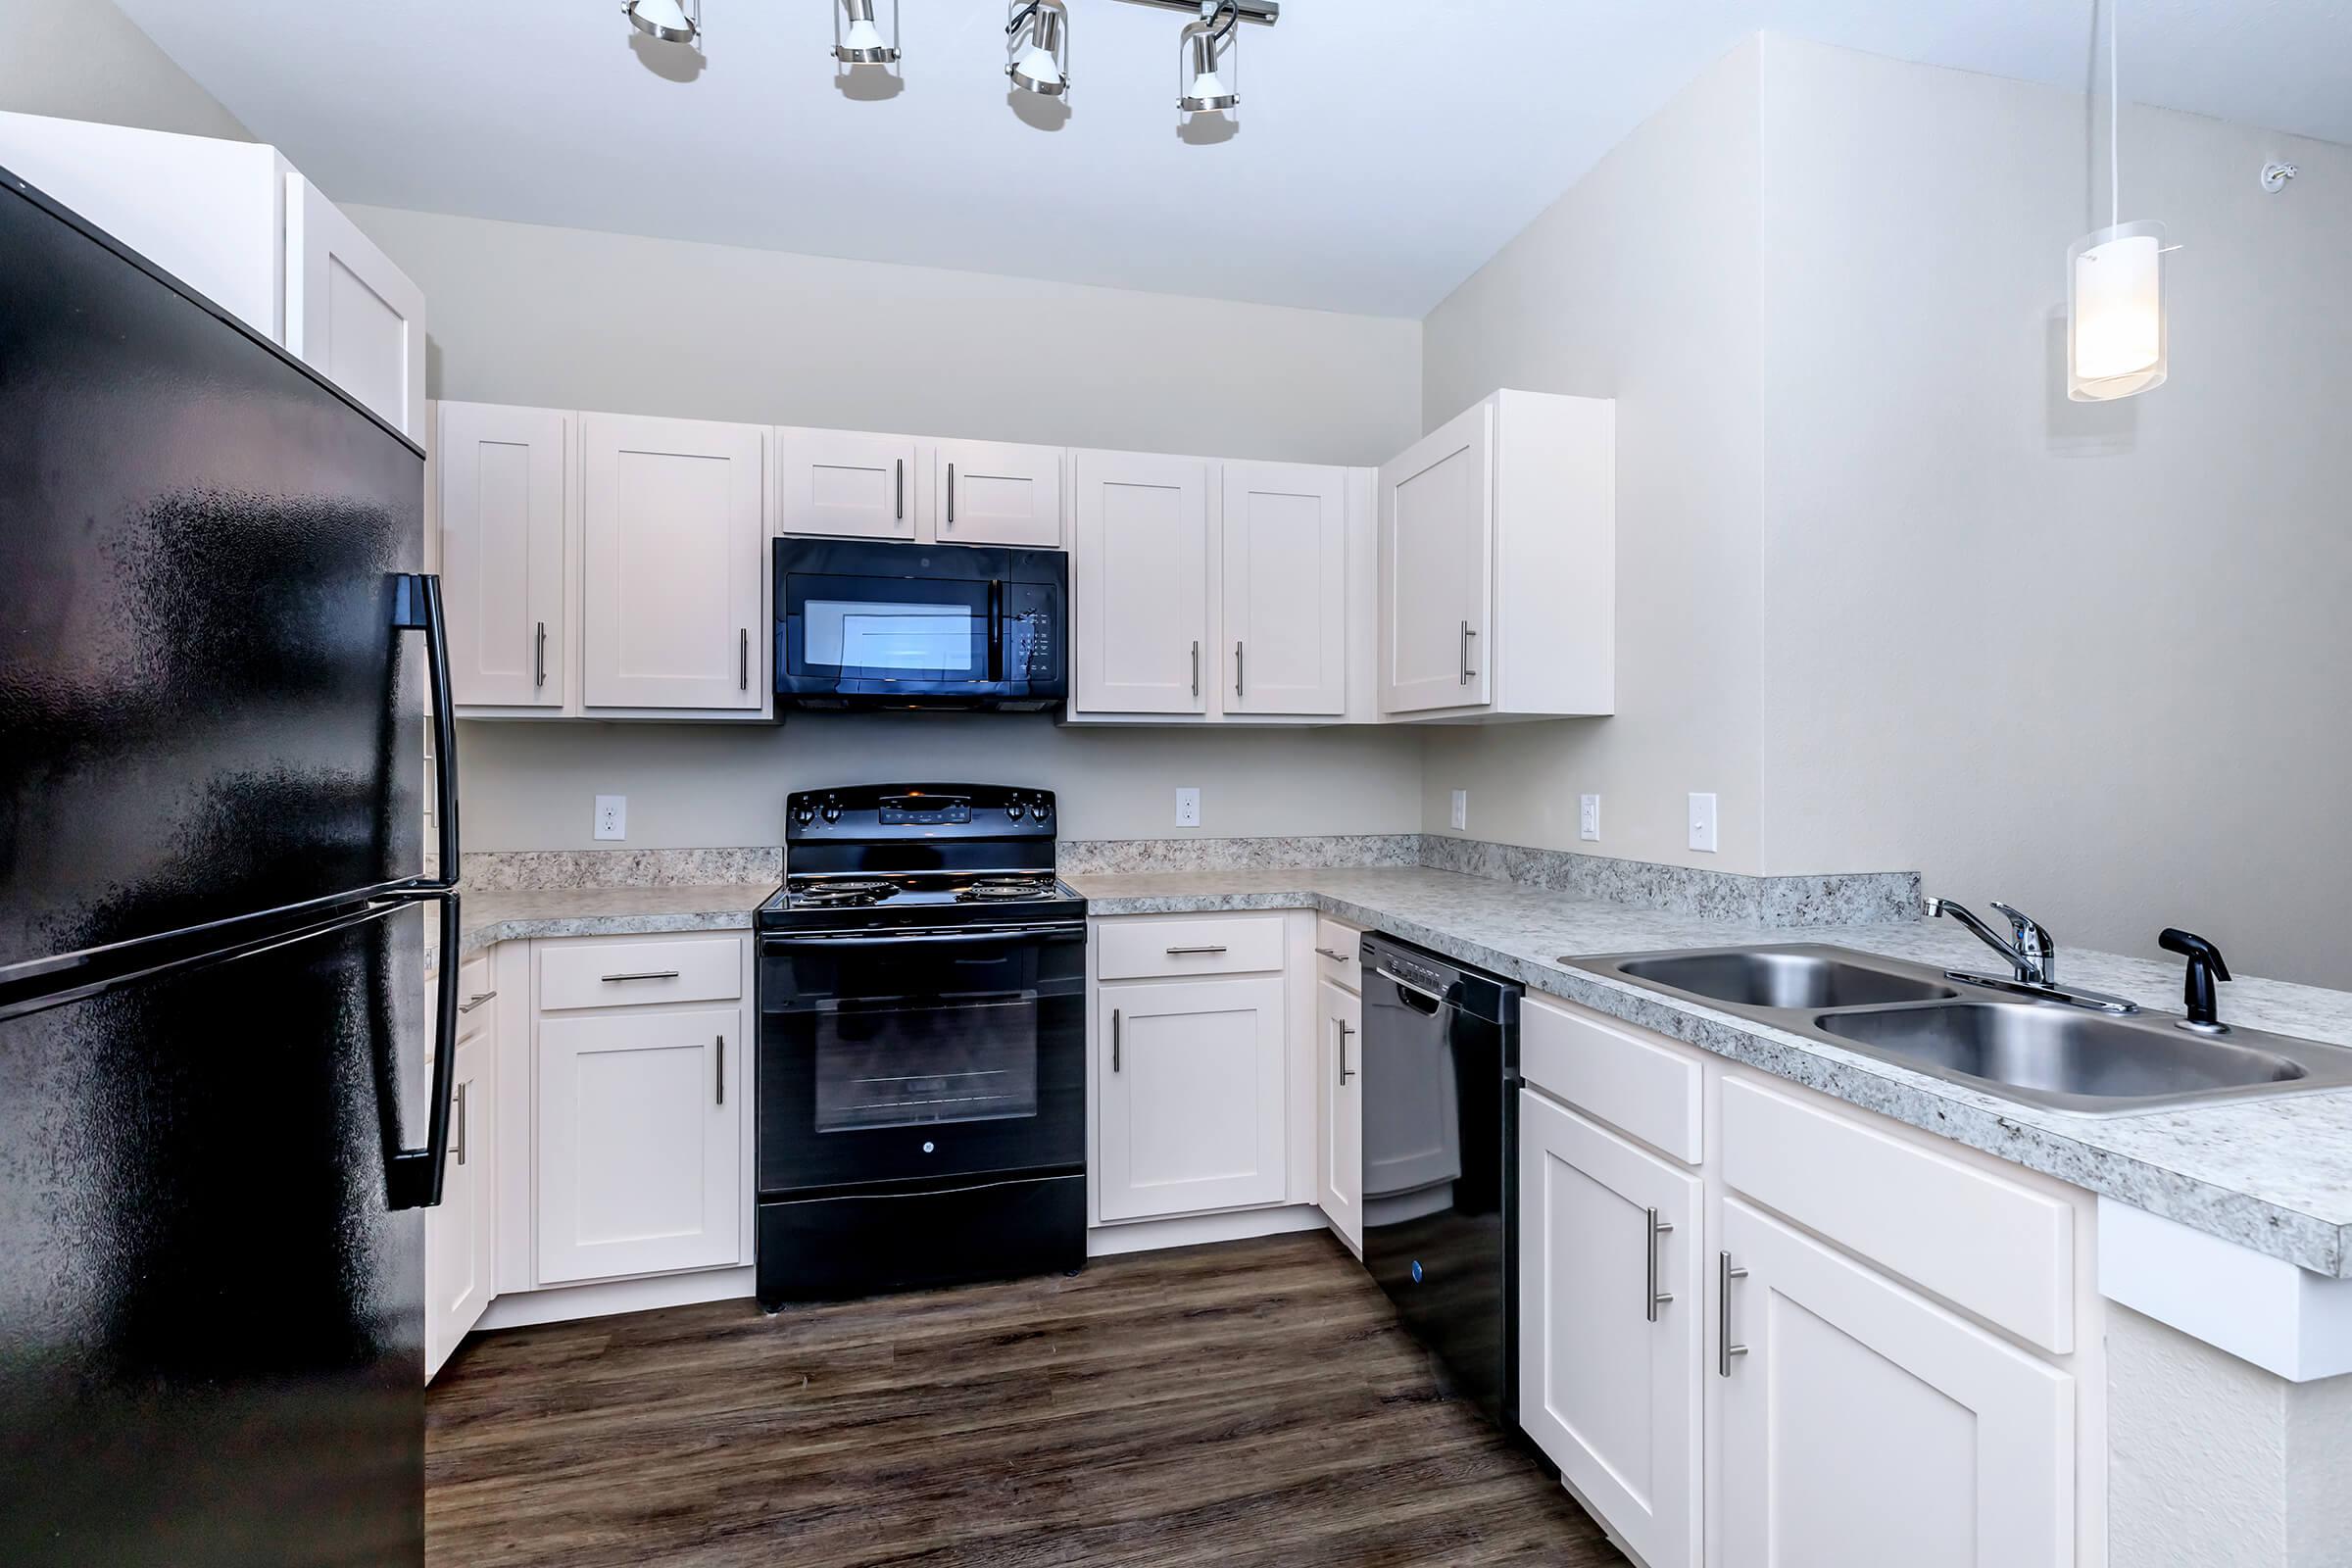 Apartments for Rent in Leander TX - Hills at Leander Spacious Kitchen with Plenty of Counterspace, Fully Equipped with Black Appliances, and Much More